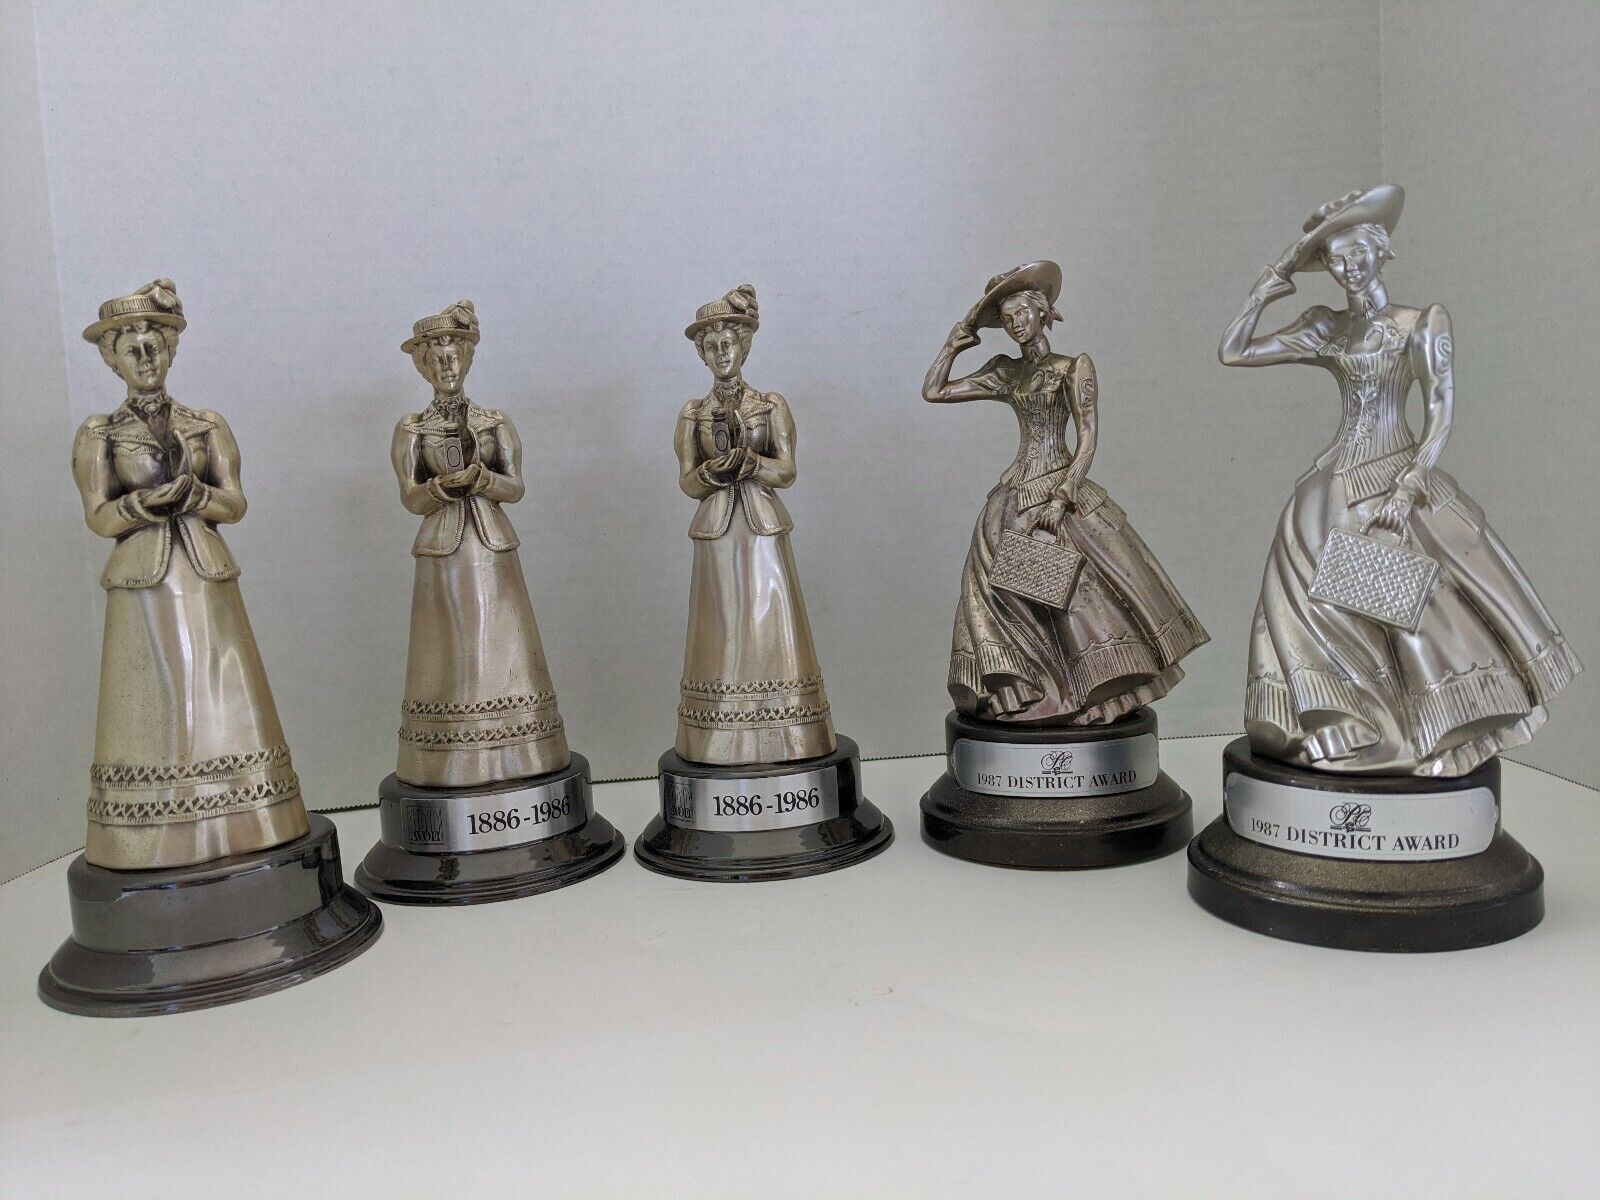 Avon Mrs Albee Lot of 5 Pewter Awards Achievement Sales 1986 1987 Trophy Statue